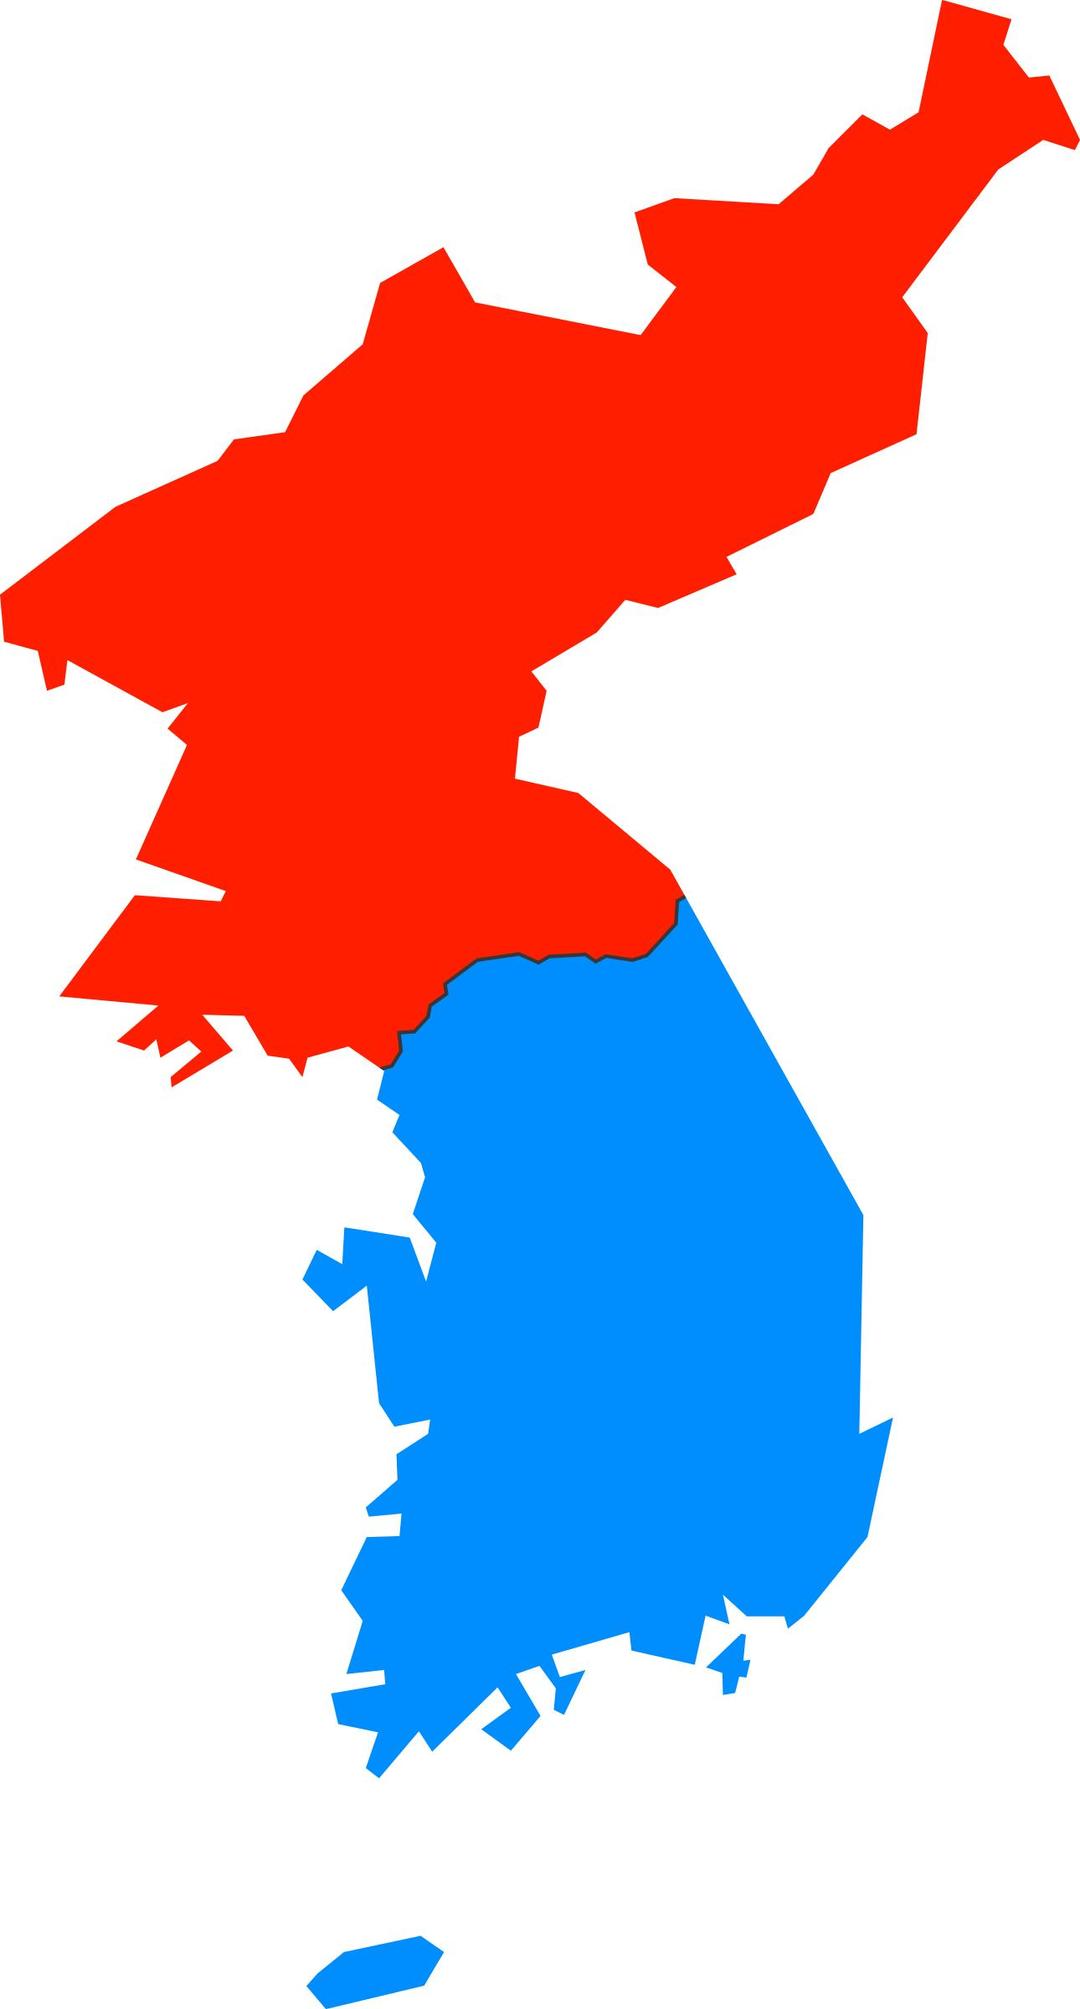 North and South Korea Simple Map png transparent